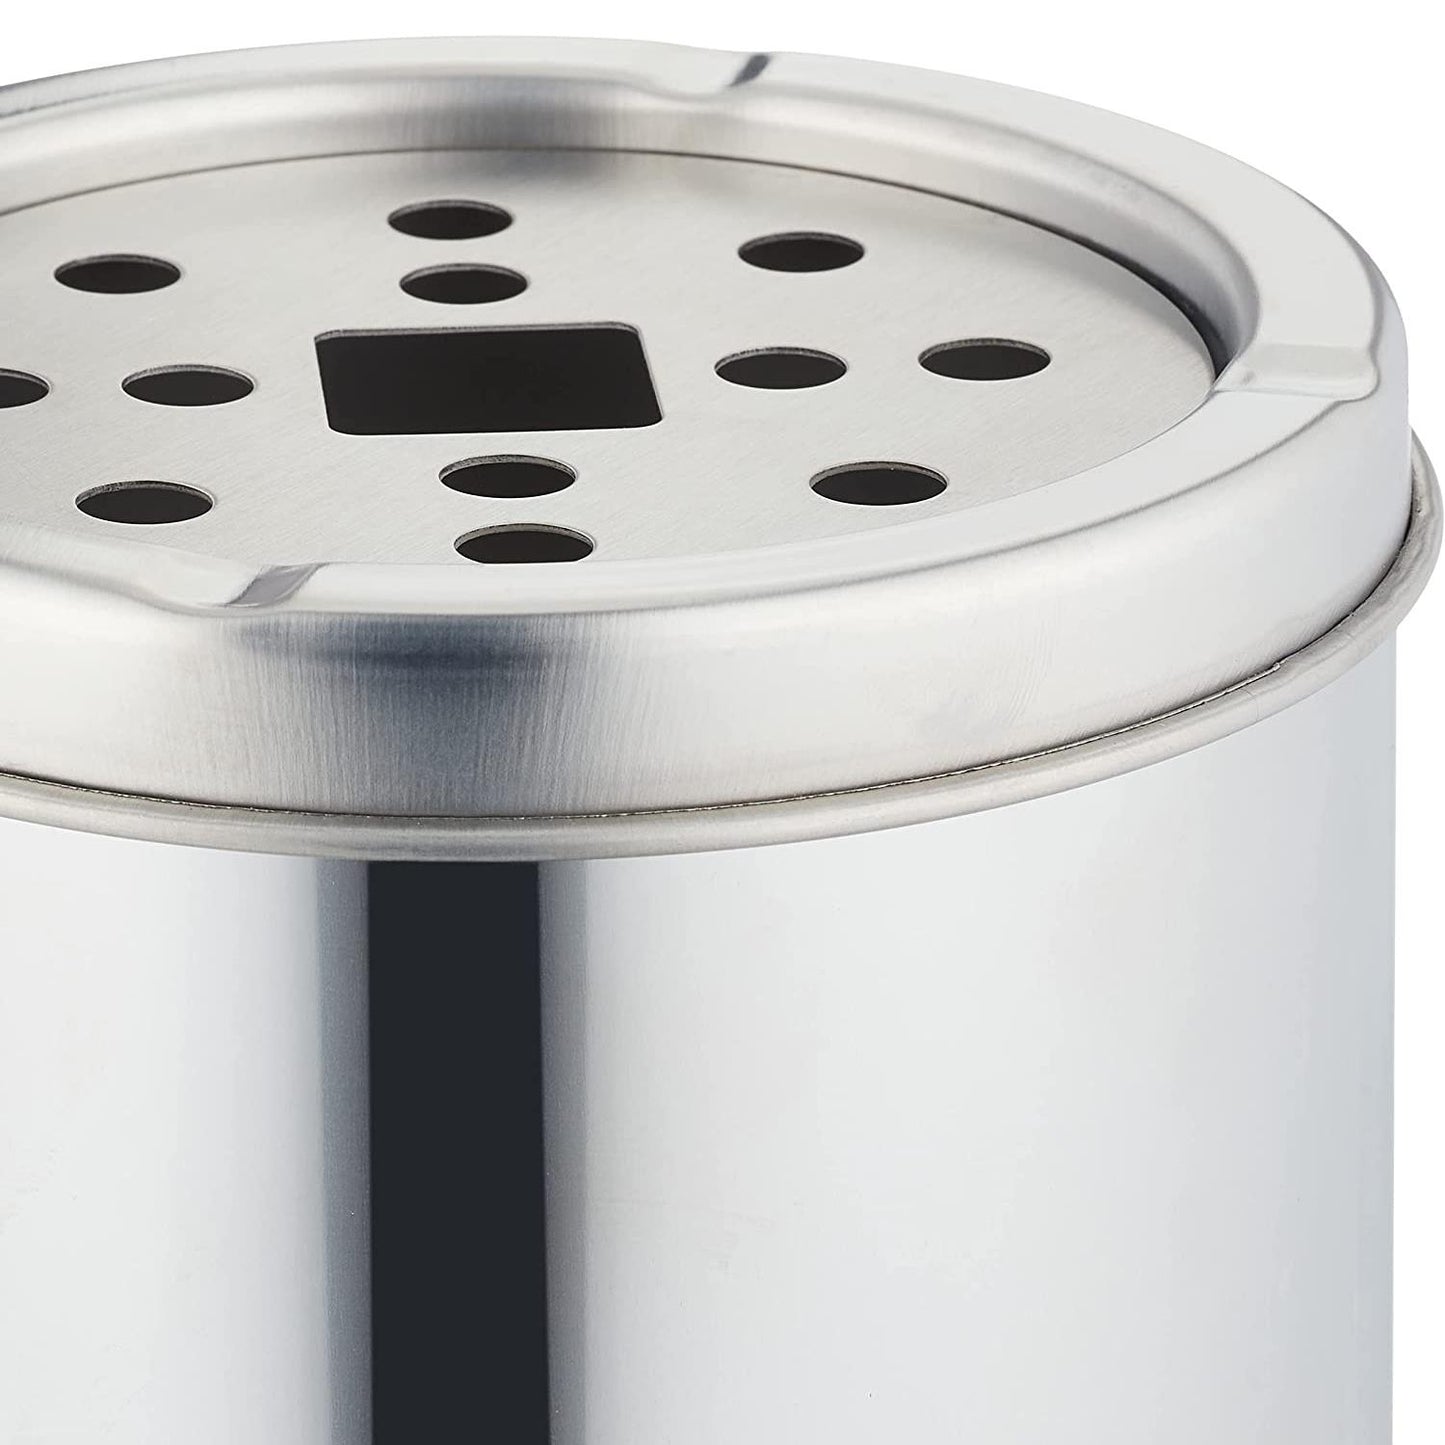 Stainless Steel Bin with Ashtray by Geezy - UKBuyZone